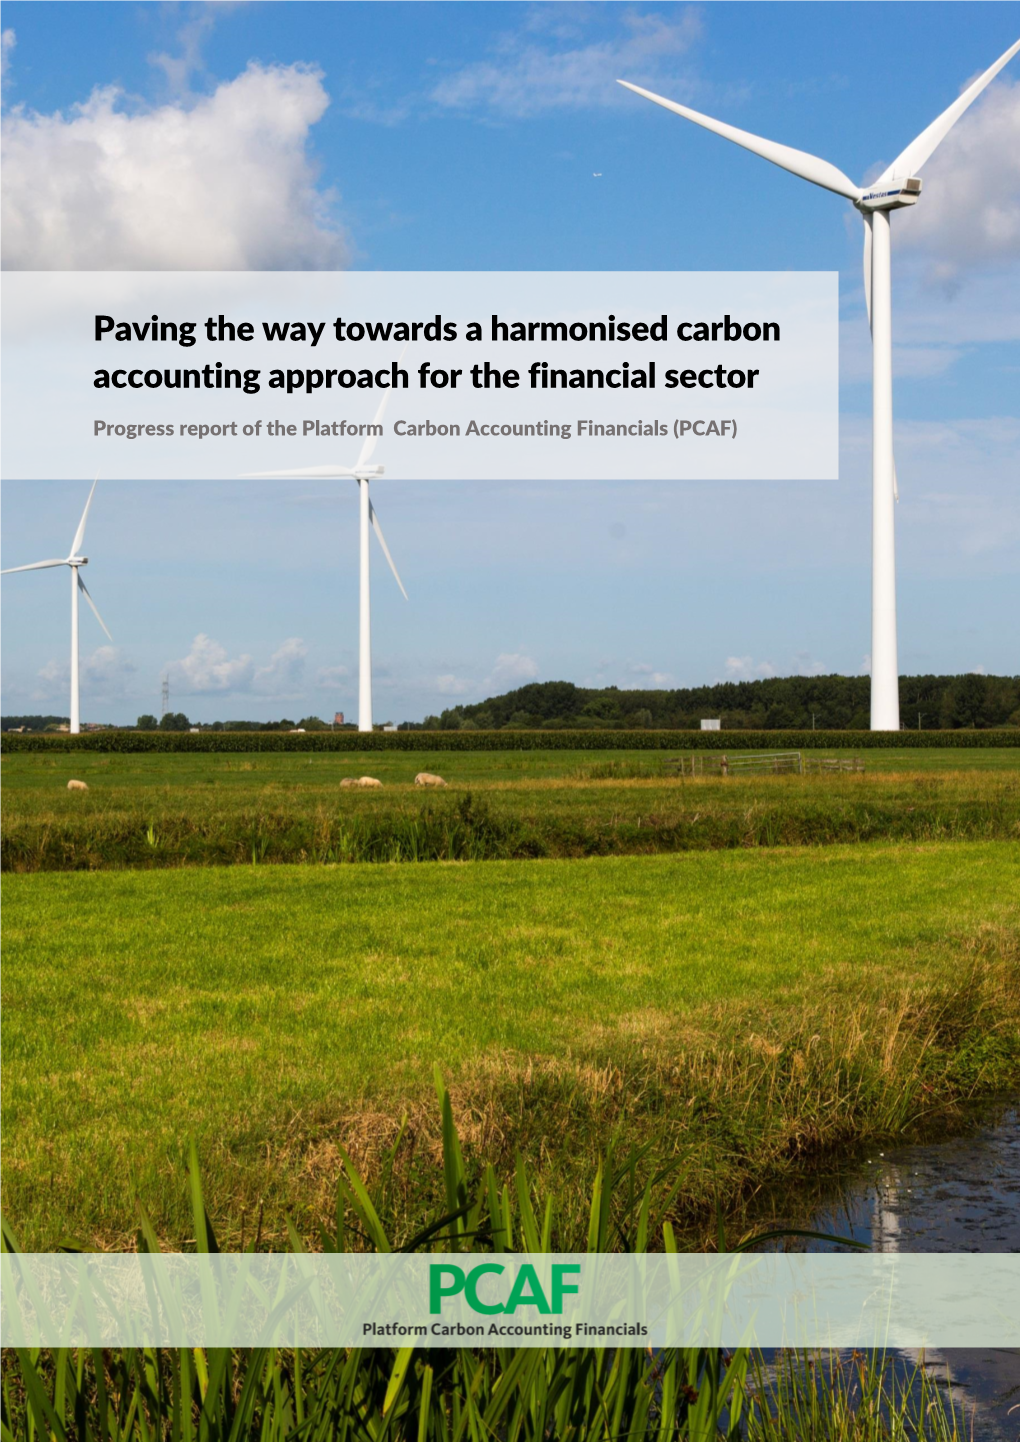 Paving the Way Towards a Harmonised Carbon Accounting Approach for the Financial Sector